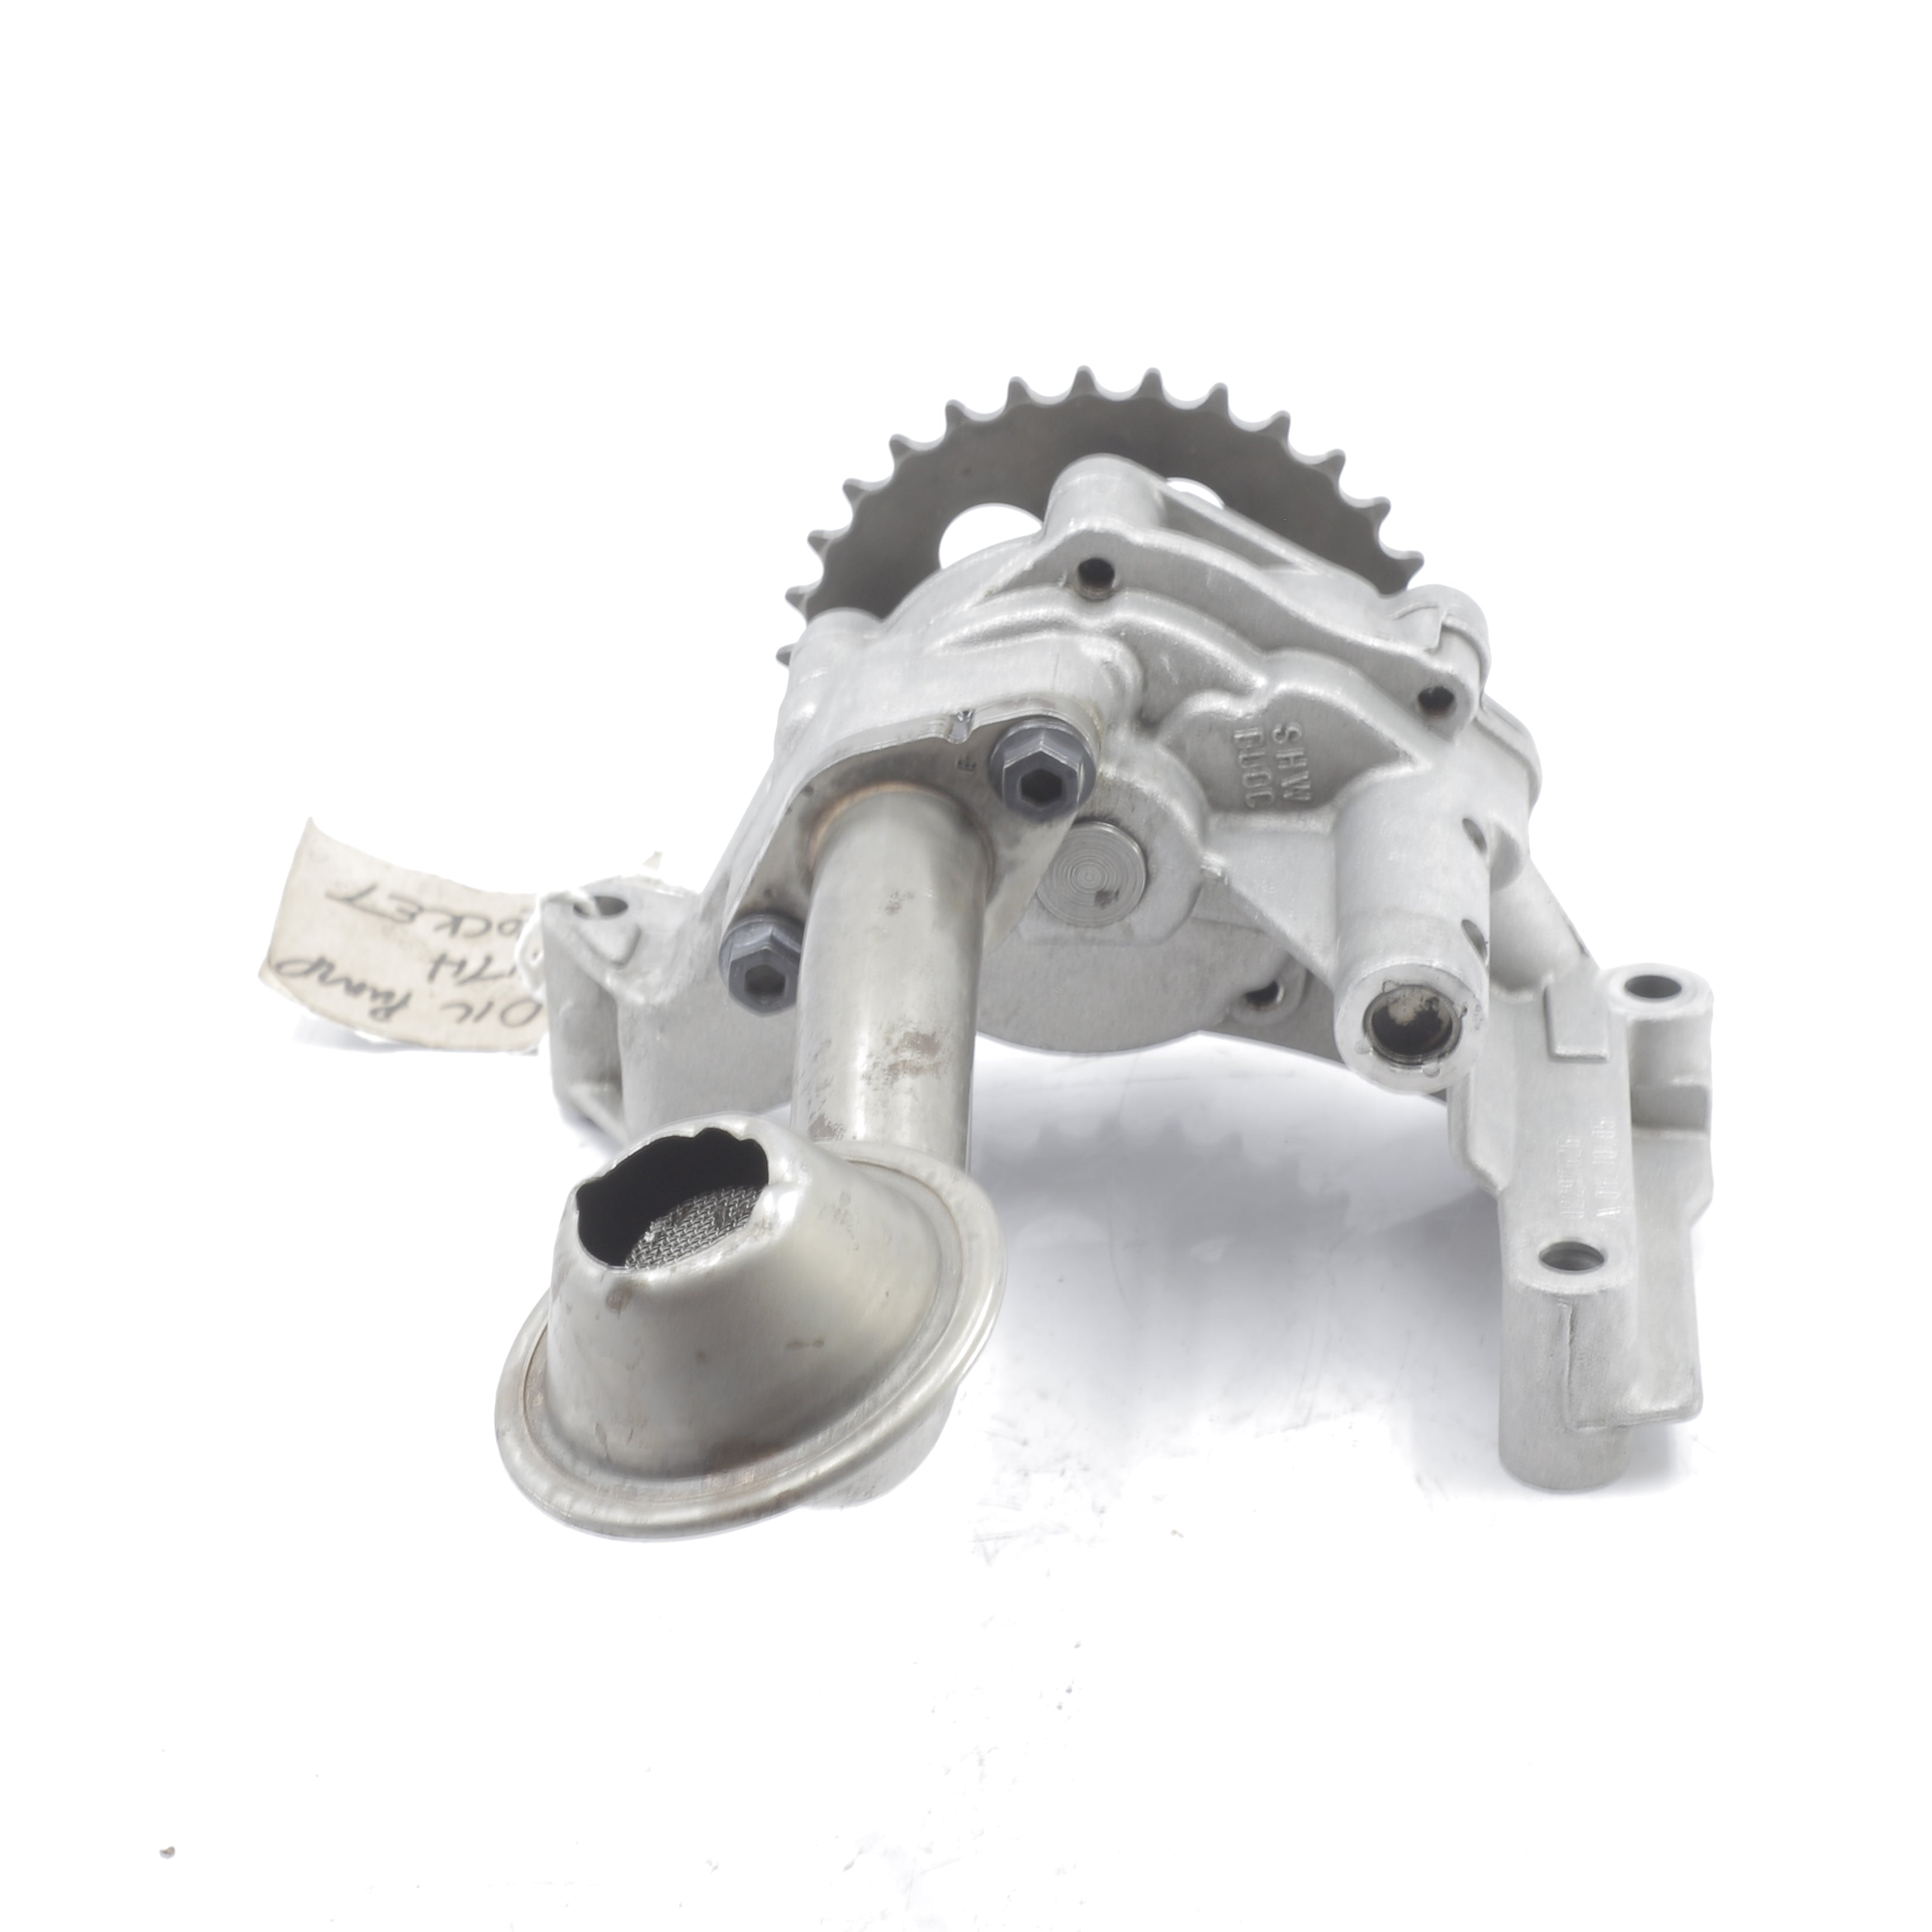 Audi A4 (Pre-Facelift) B8 (Type 8K) 2.0 TFSI Oil Pump with Sprocket